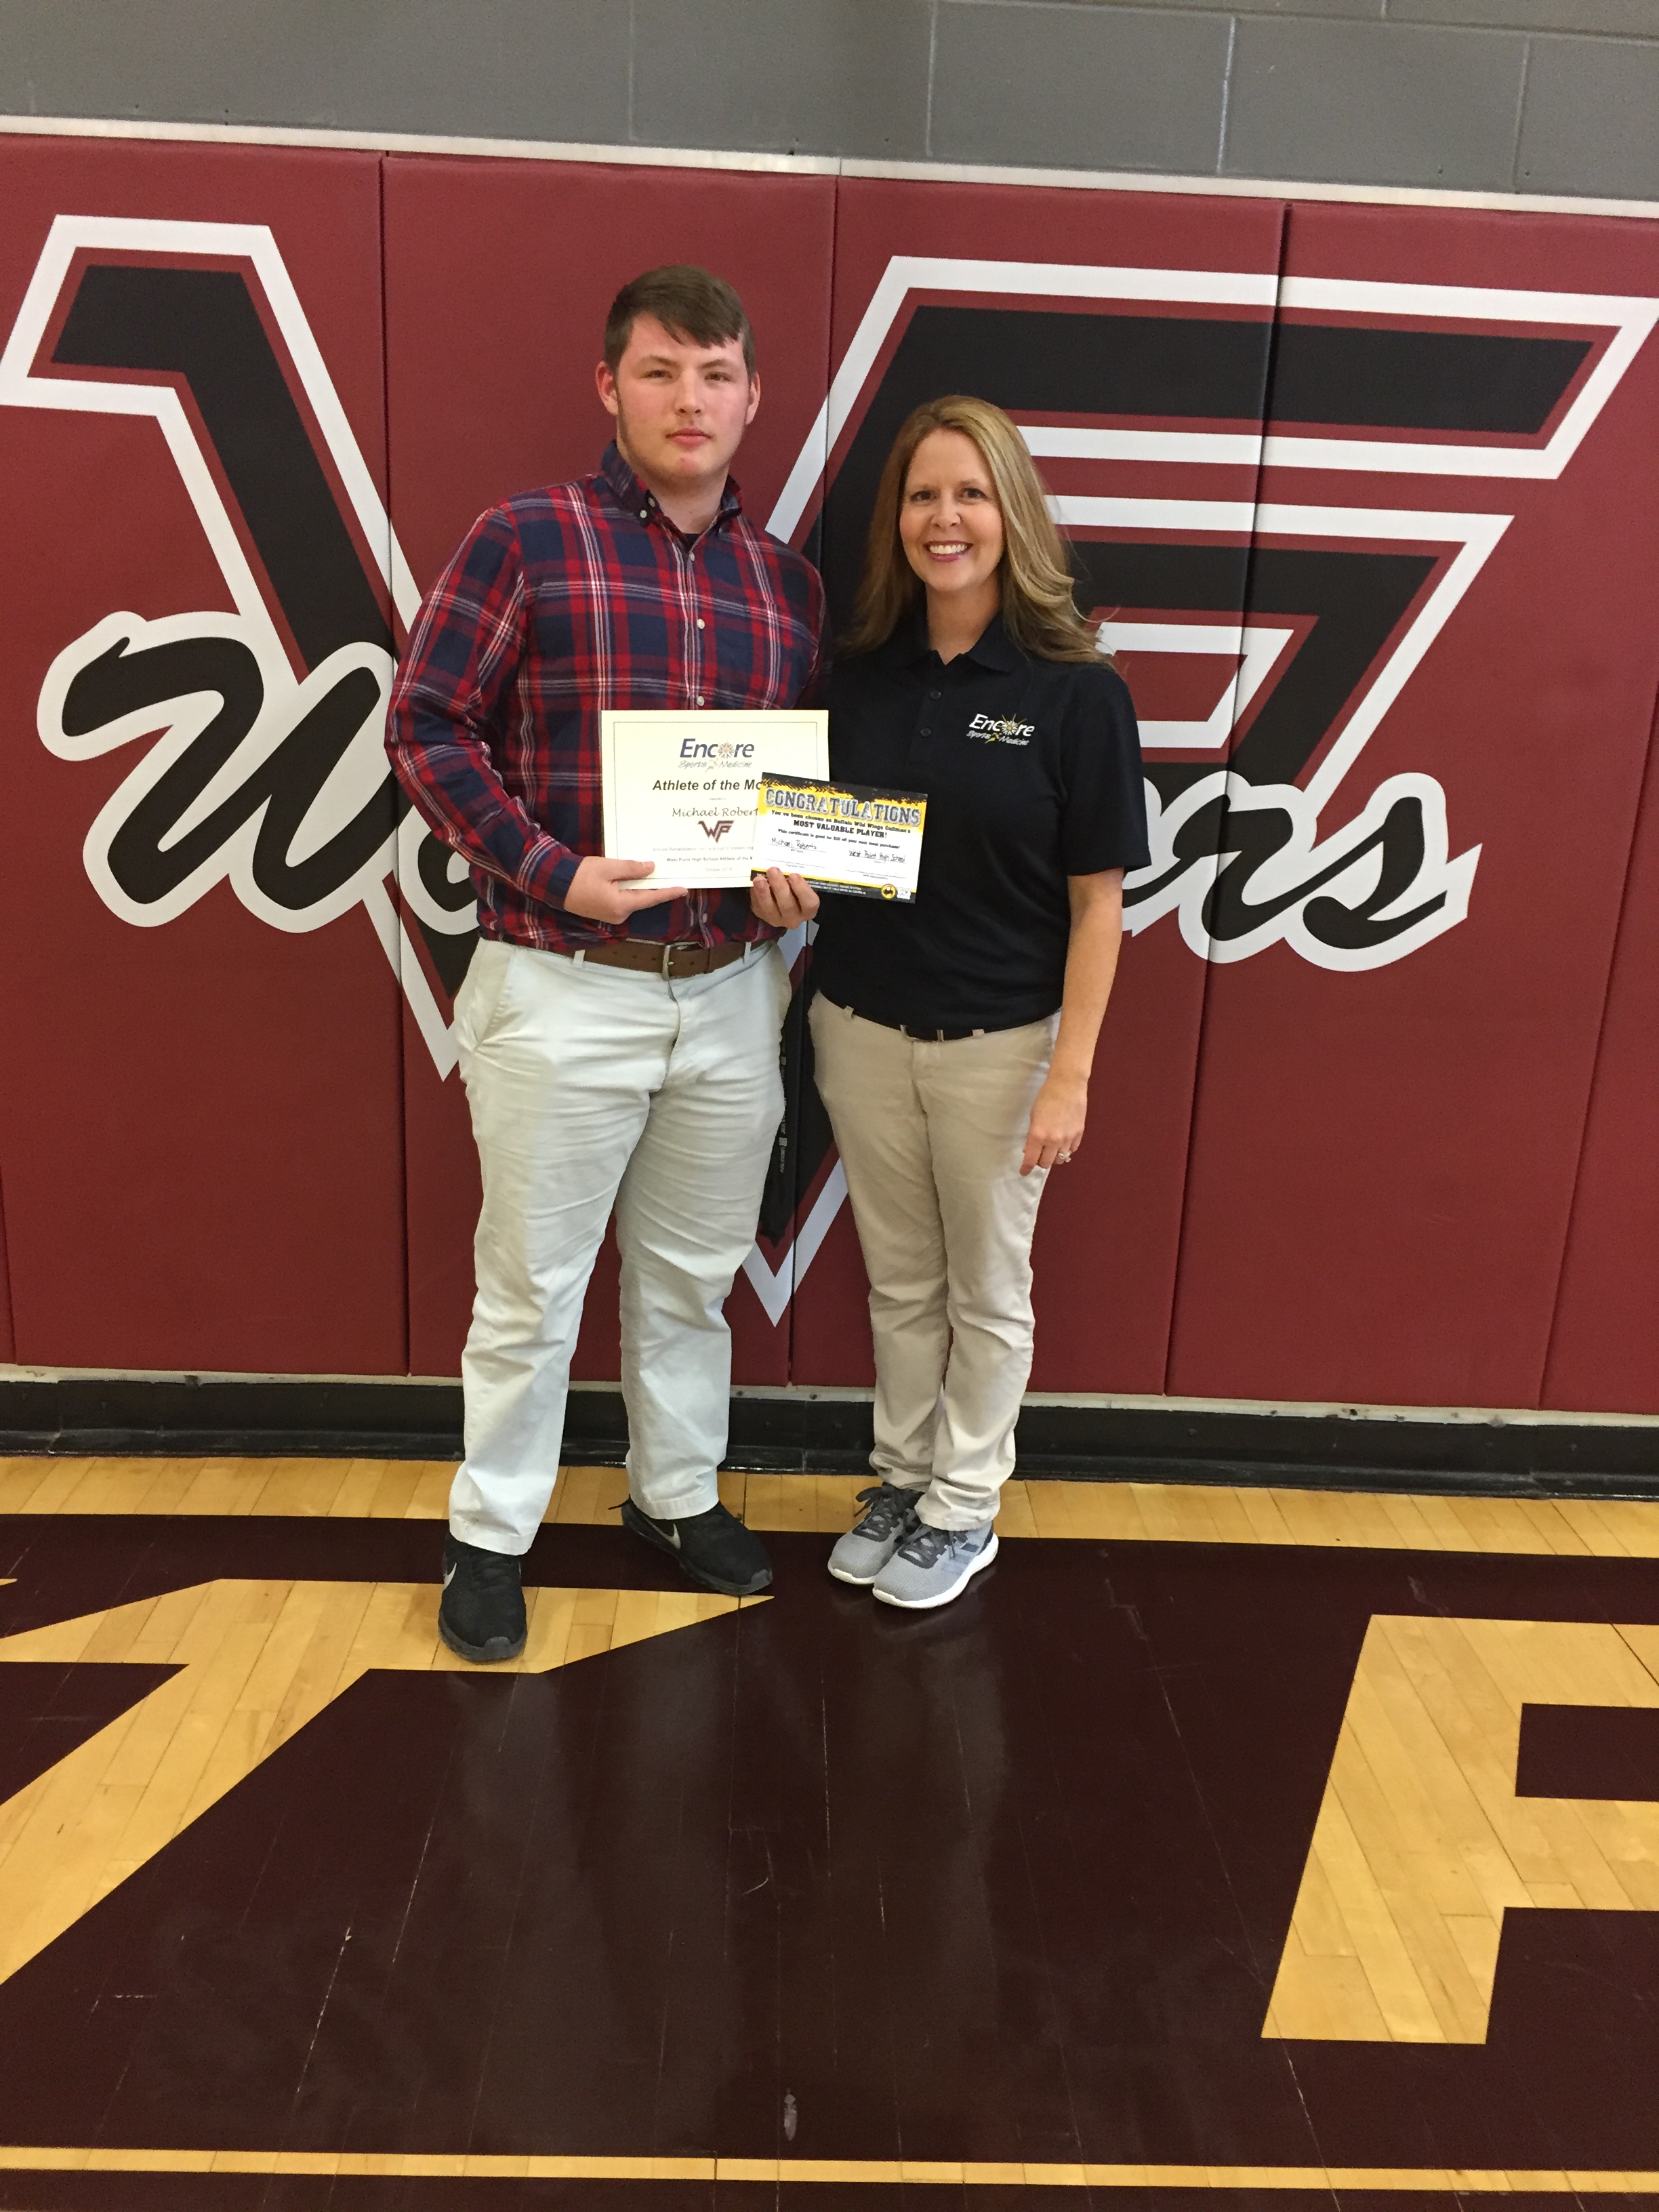 Michael Roberts is Athlete of the Month for West Point High School and Encore Rehabilitation-Cullman #EncoreRehab